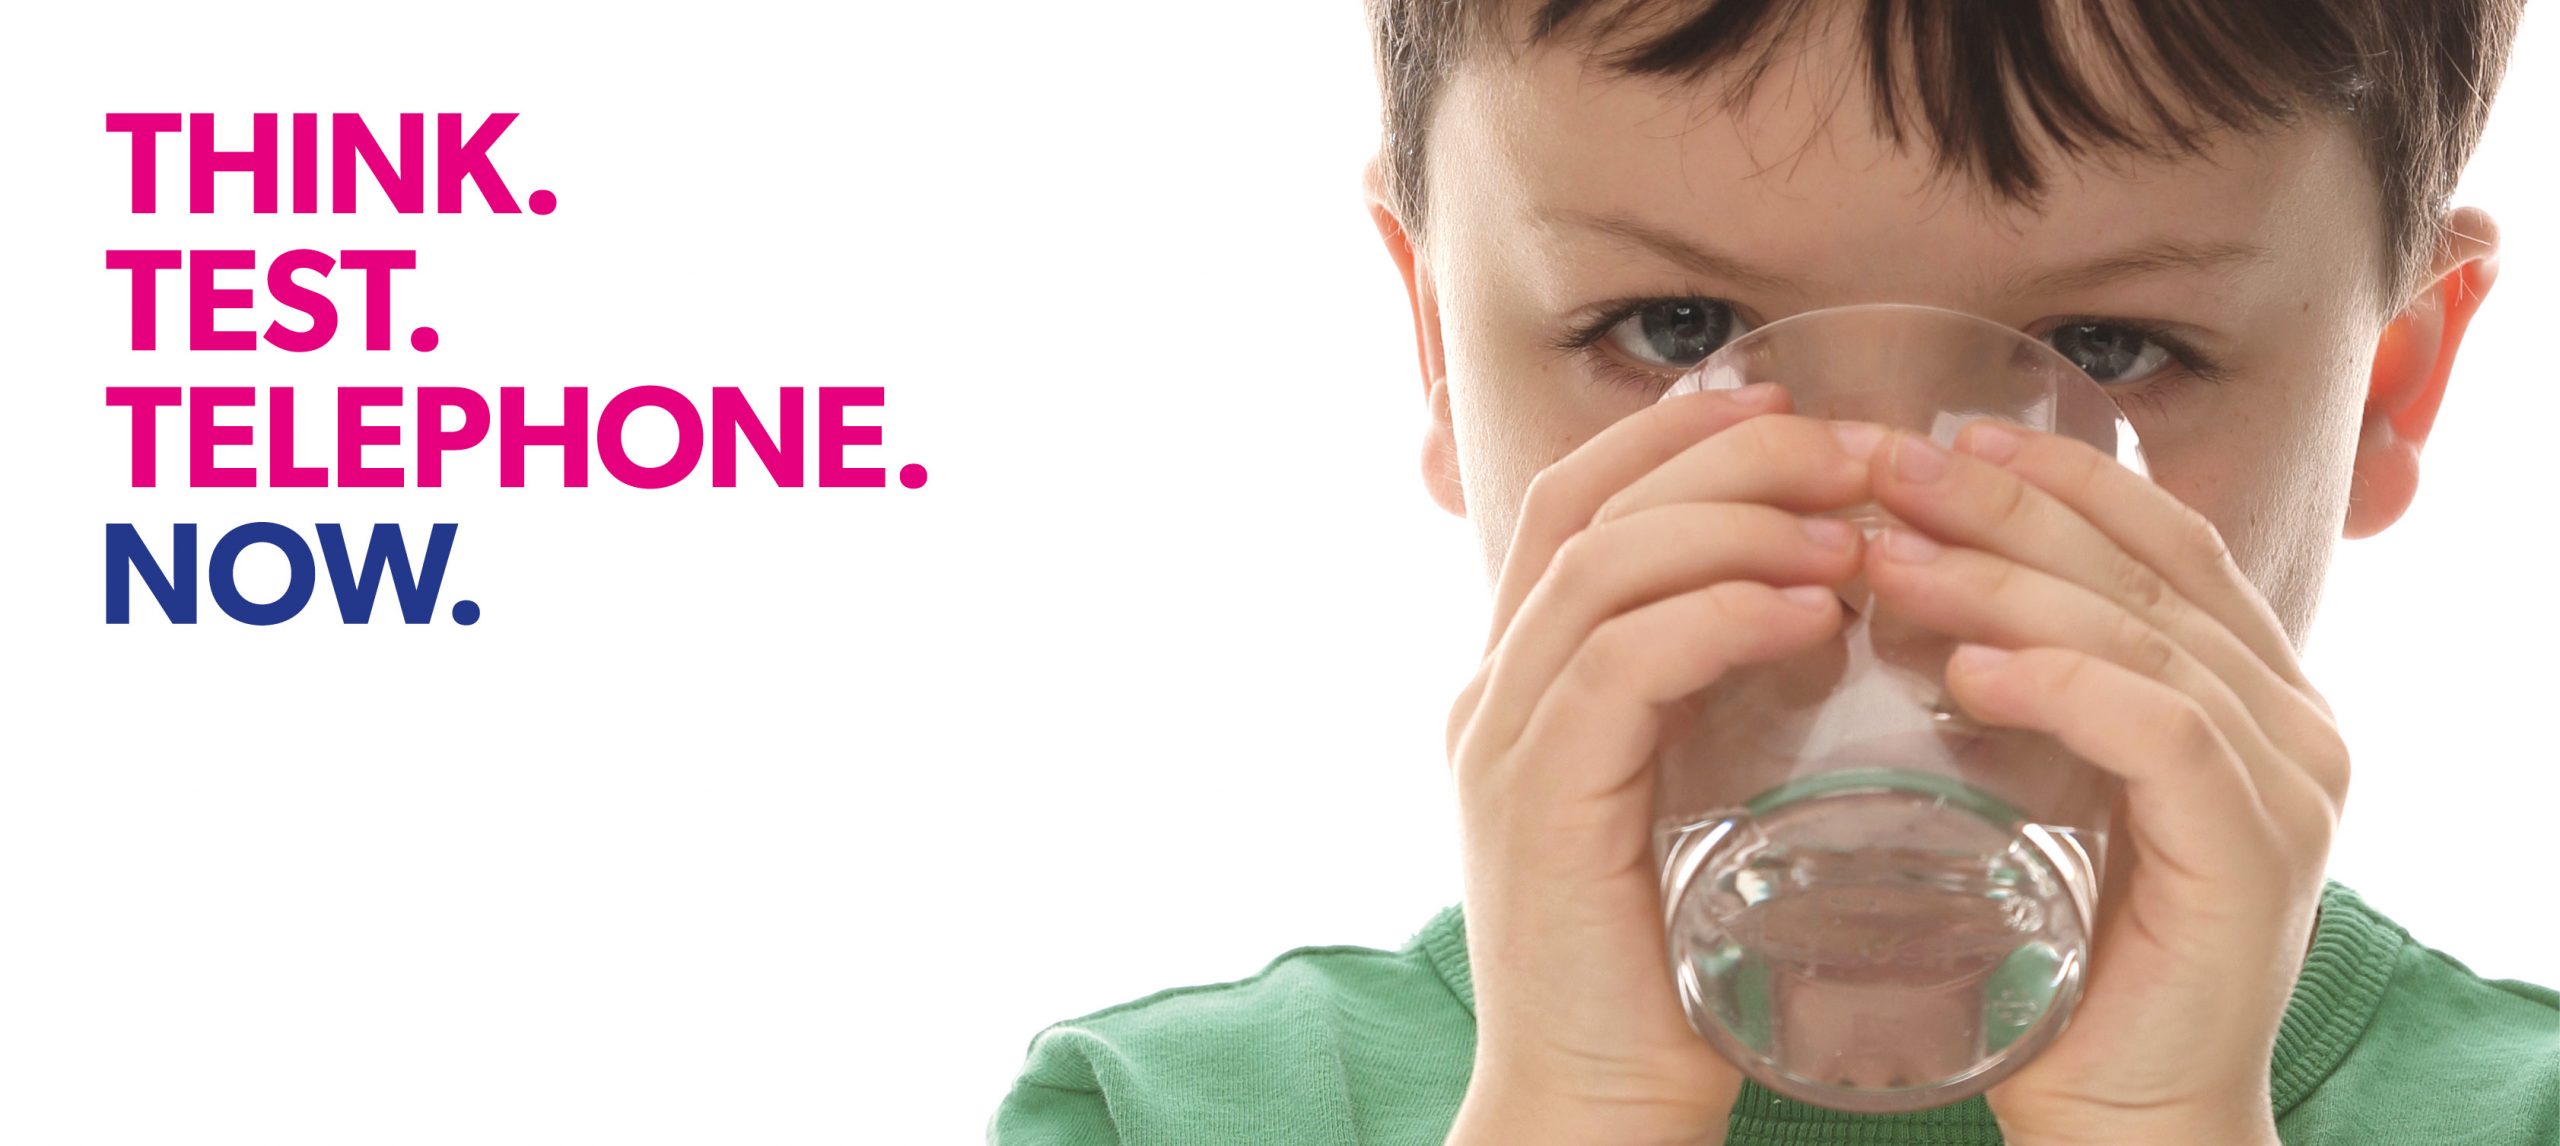 Think. Test. Telephone. Now. strapline next to a thirsty boy drinking a glass of water – imagery from NHS Scotland's Diabetic ketoacidosis awareness campaign.